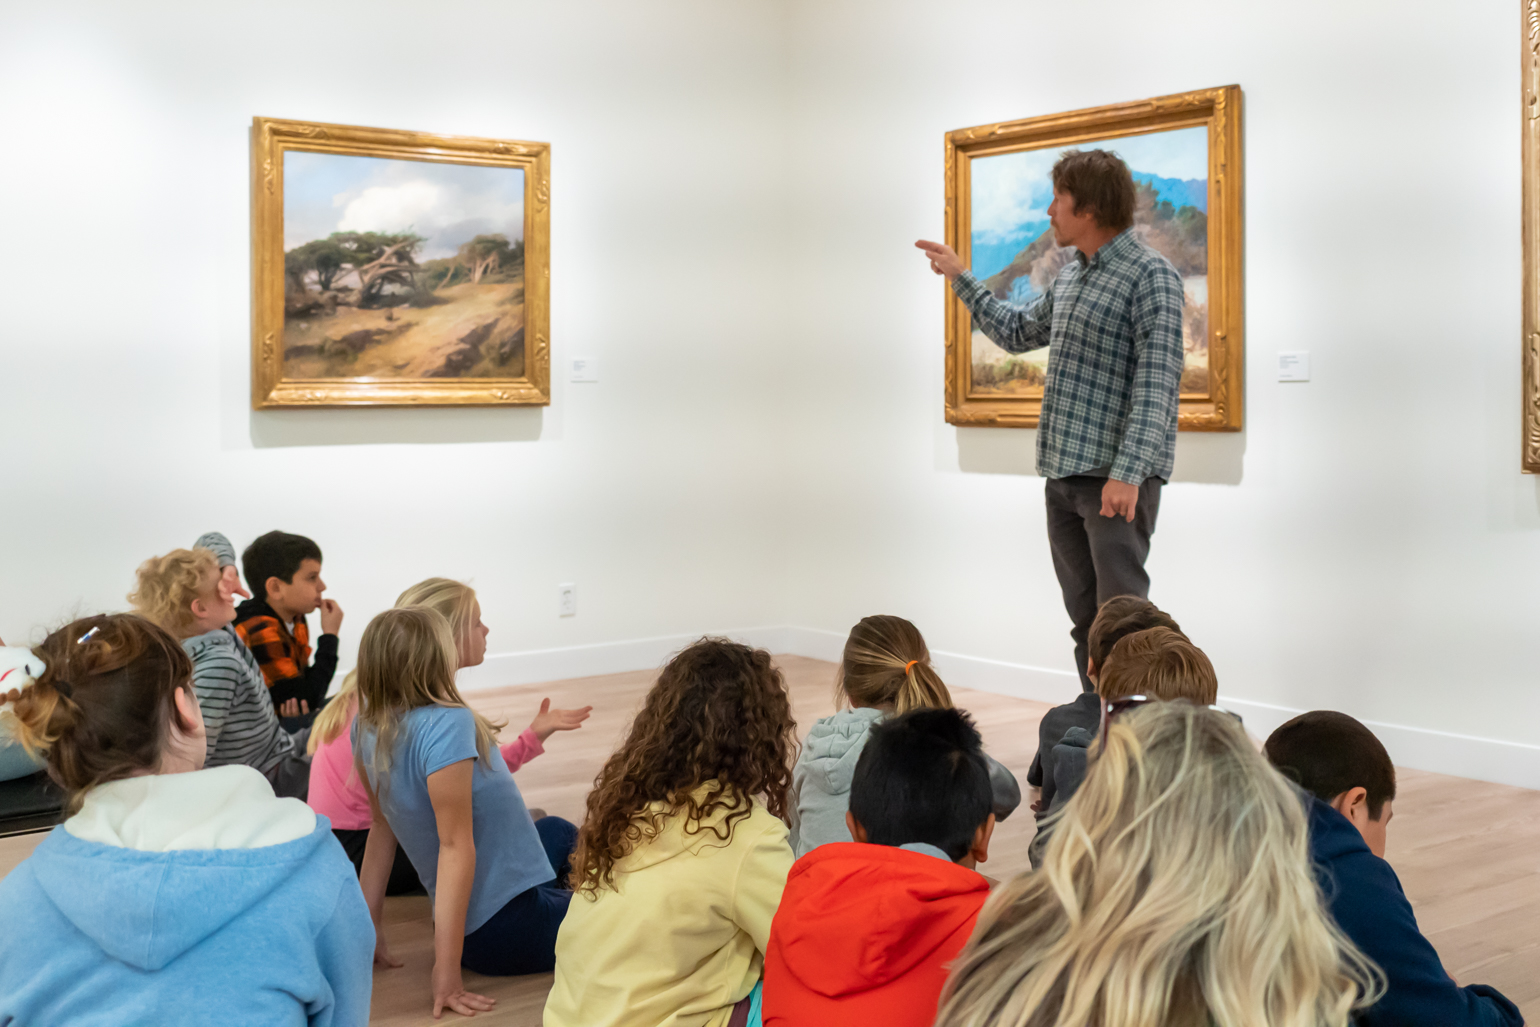 School visit with children seated in the gallery viewing artwork